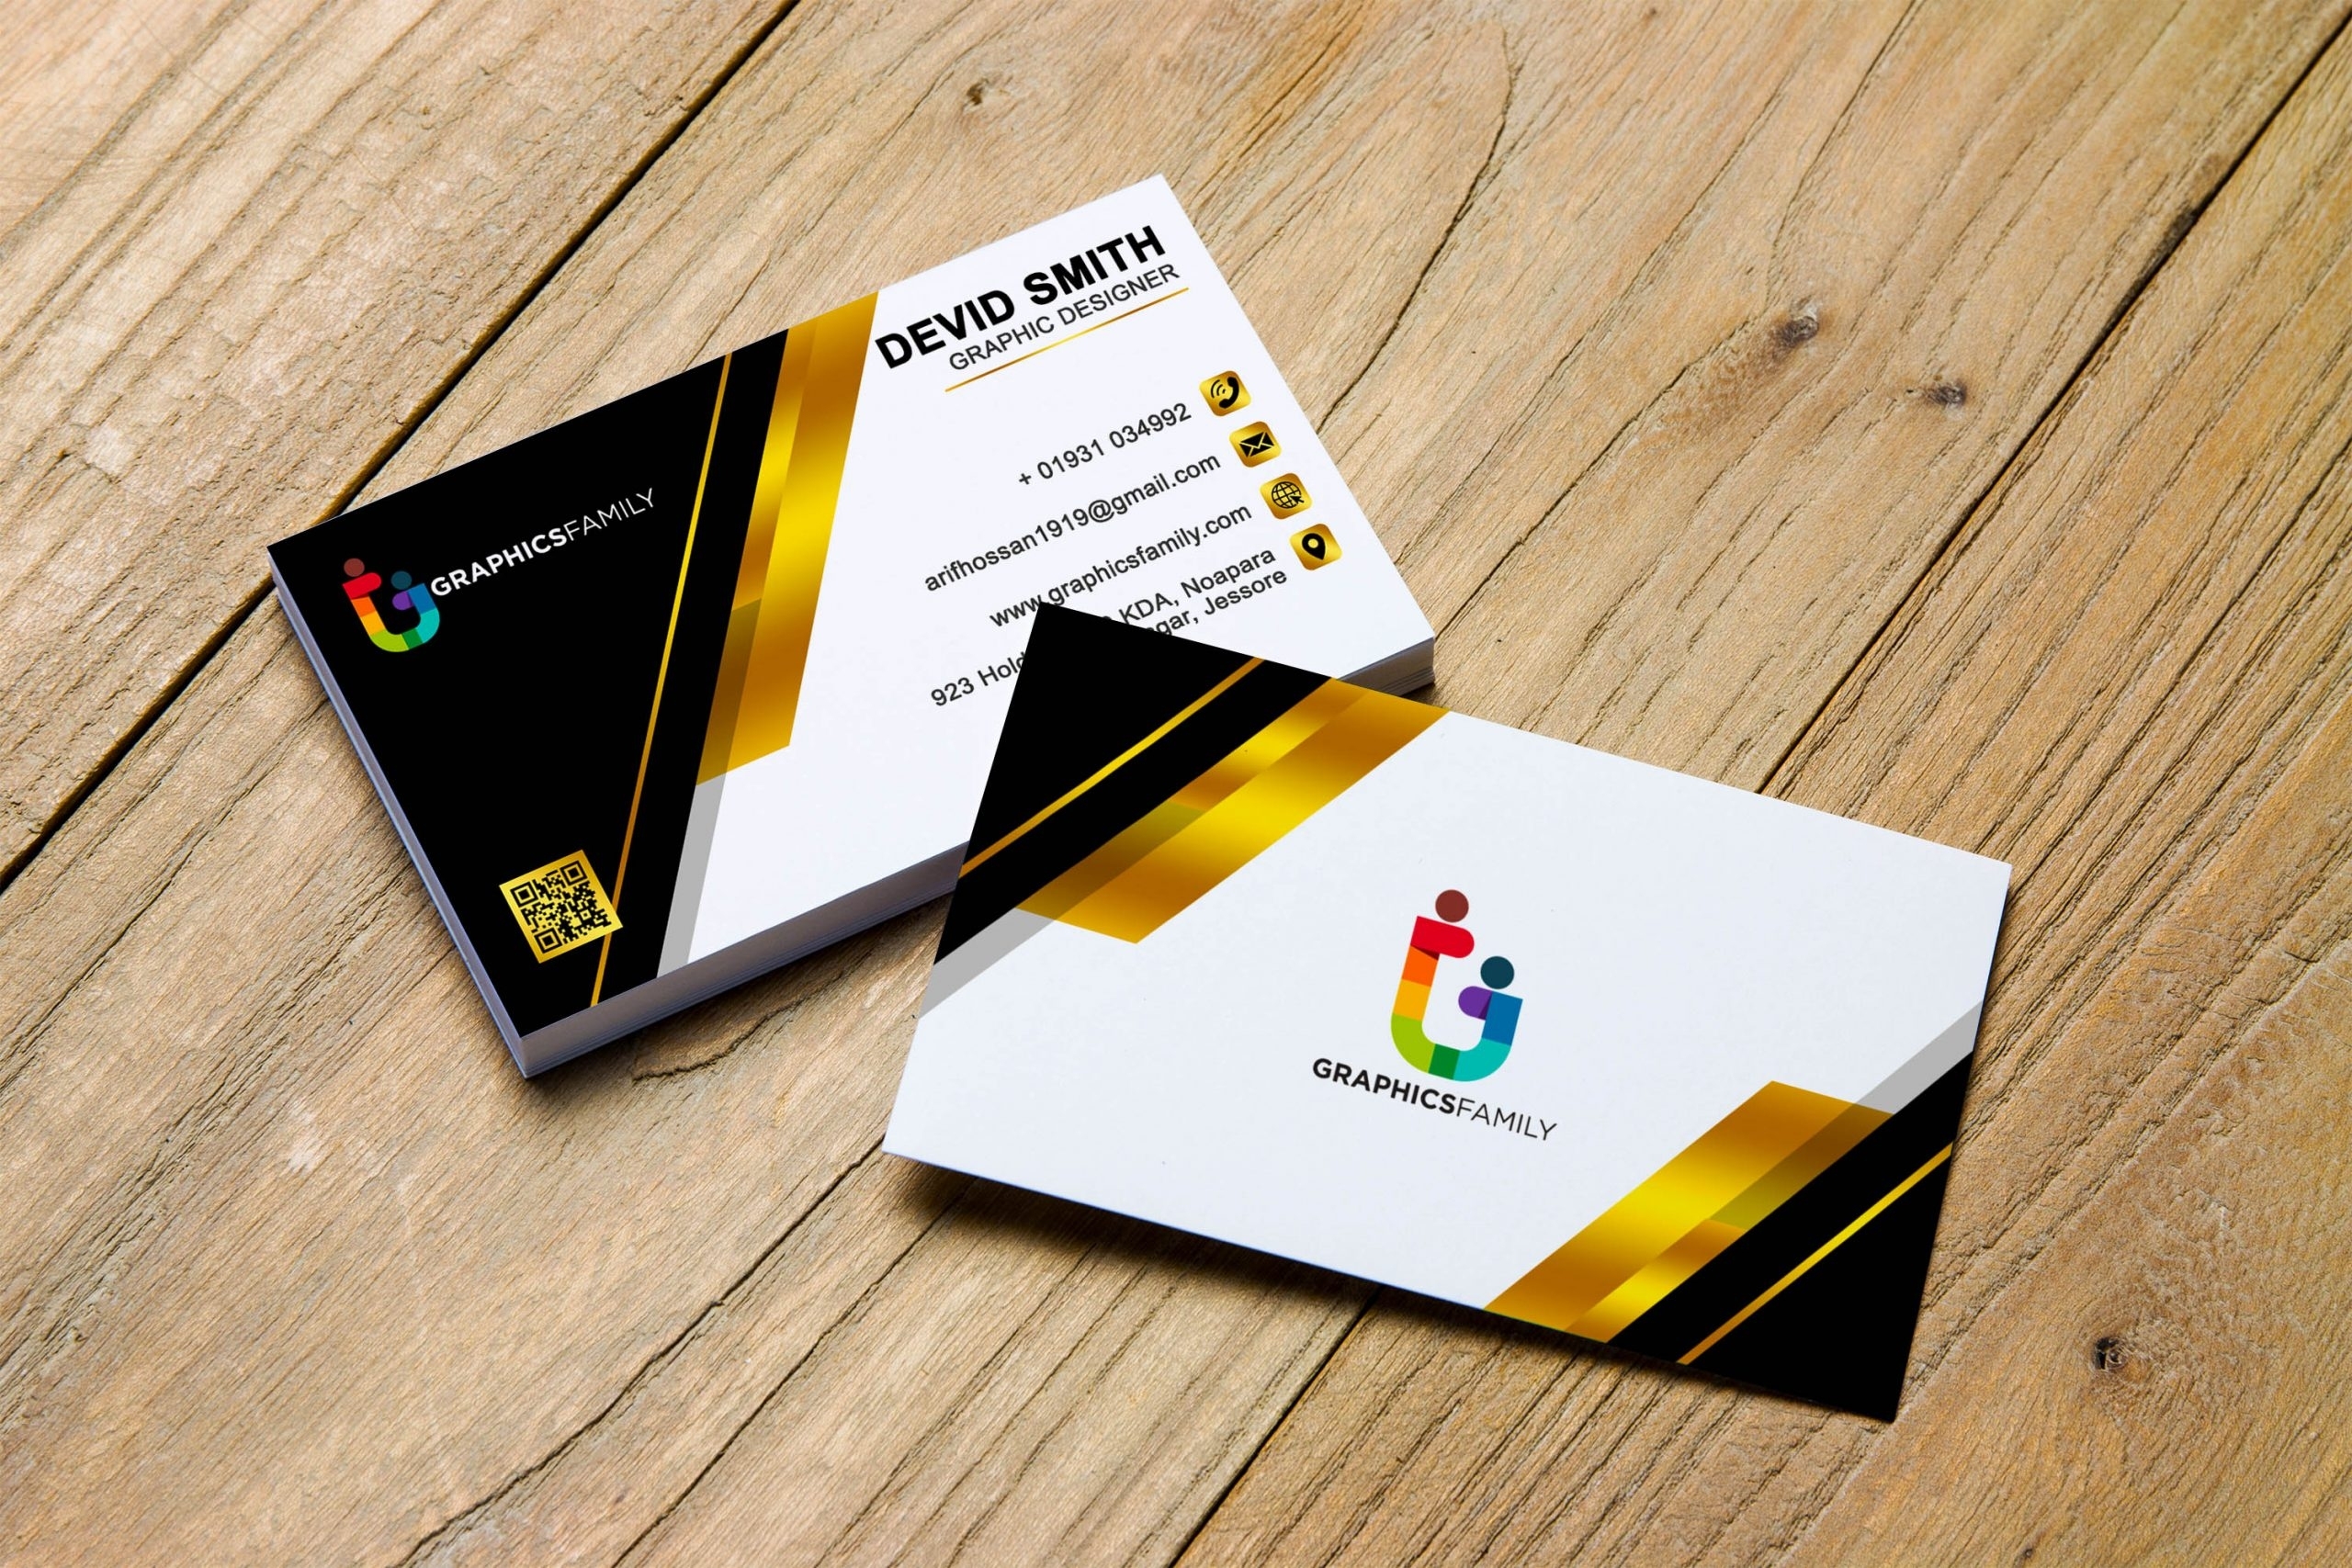 Free Accounting Analyst Business Card .Psd Template – Graphicsfamily Intended For Free Business Card Templates In Psd Format